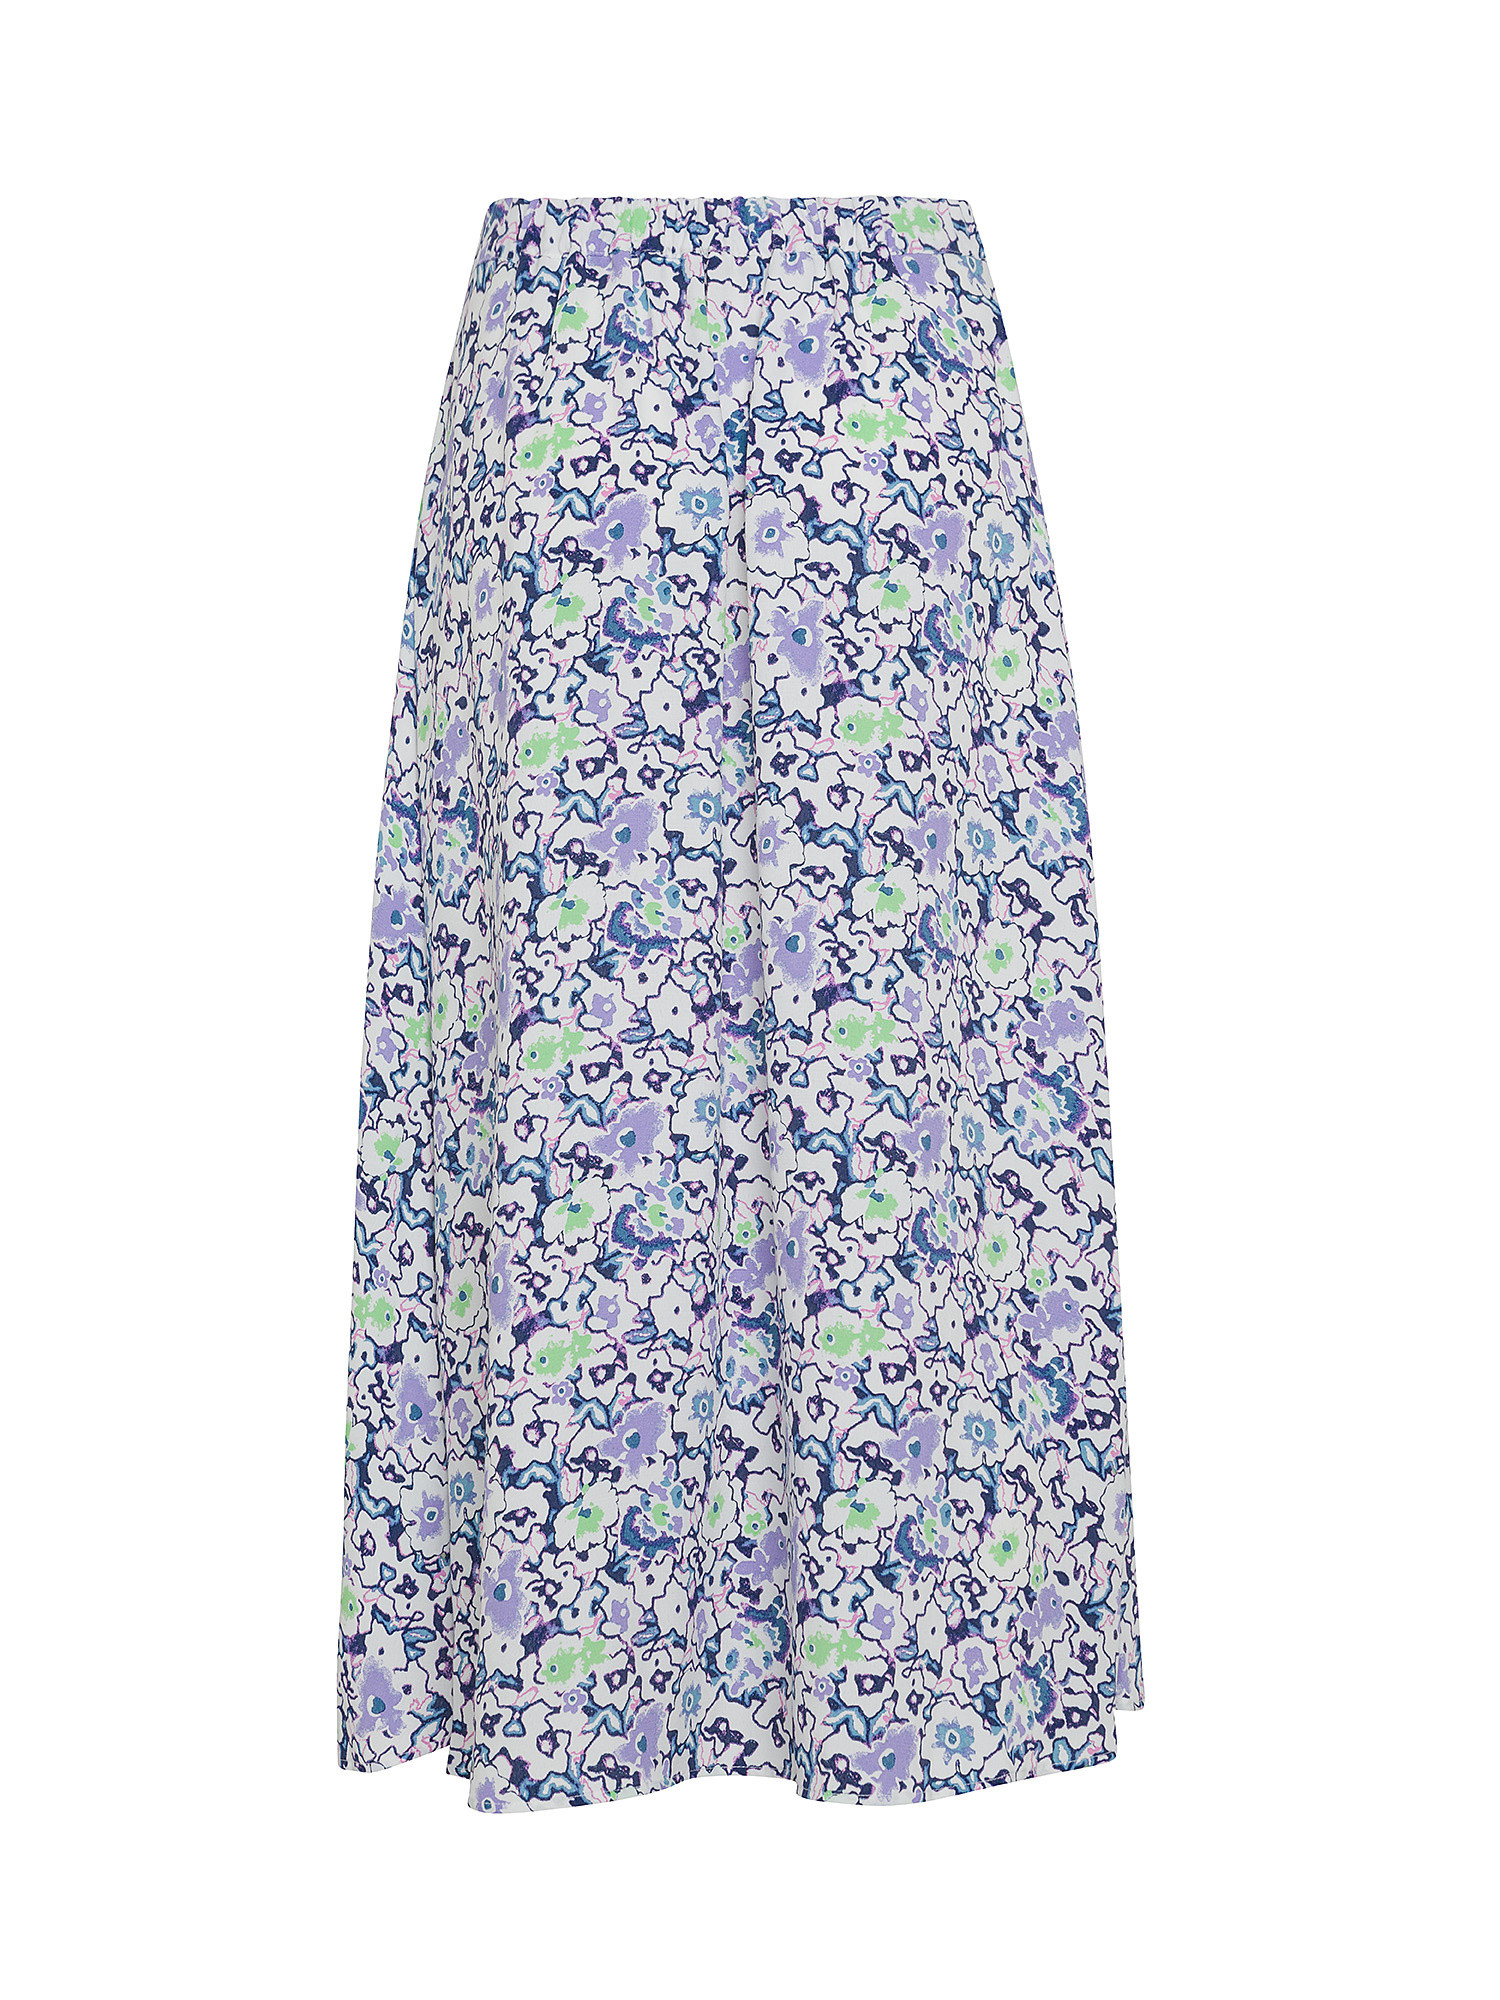 Esprit - Midi skirt with all over floral motif, White, large image number 1